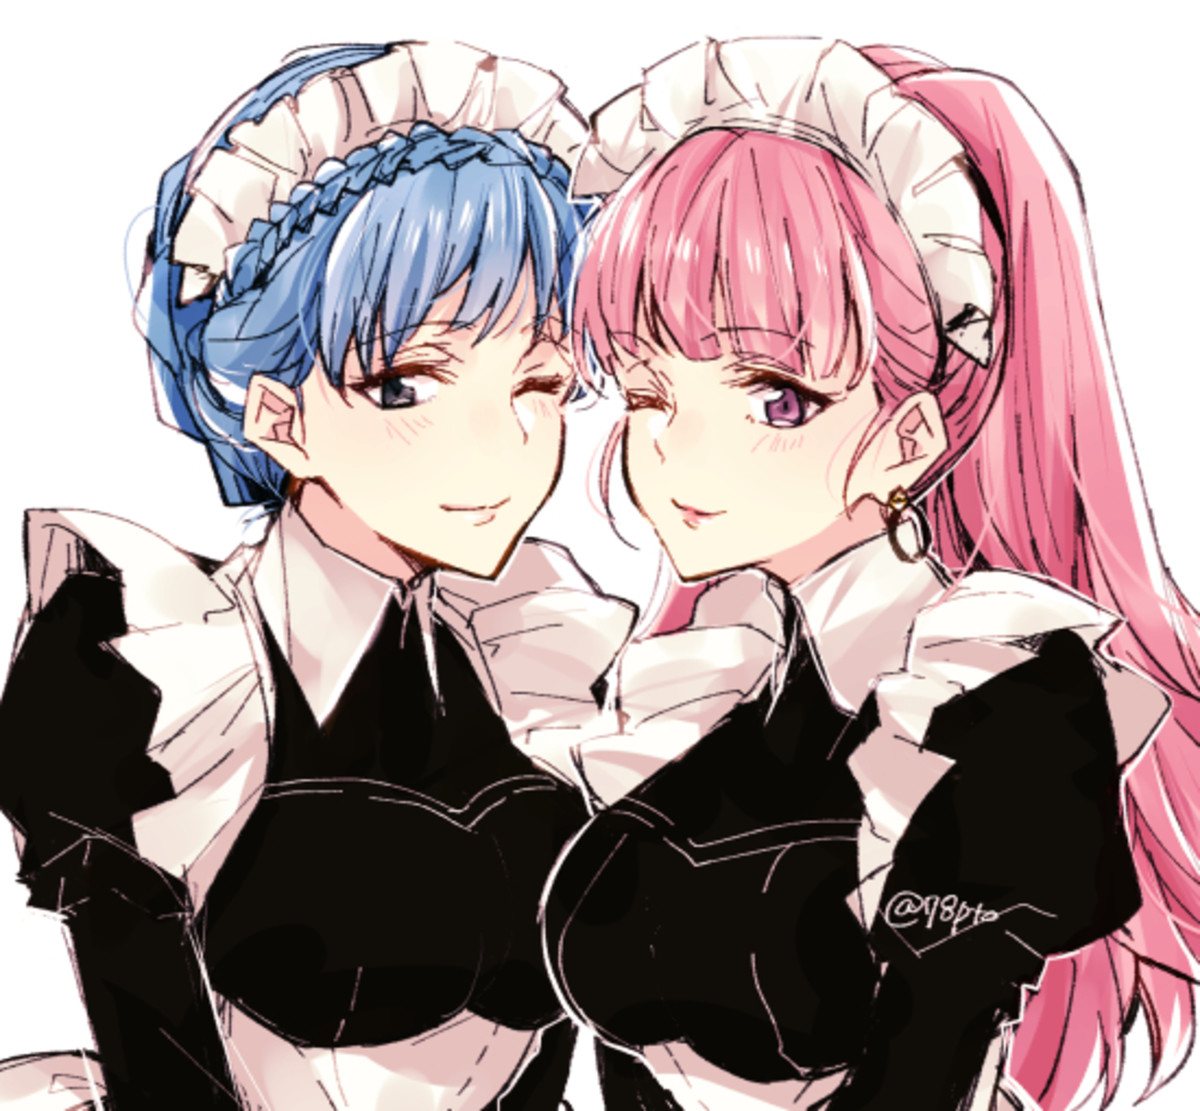 Fire Emblem Maids part 2. join list: MagnificentMaids (831 subs)Mention History join list:. FJ is still doing that thing where it just eats the last thing you upload I see.